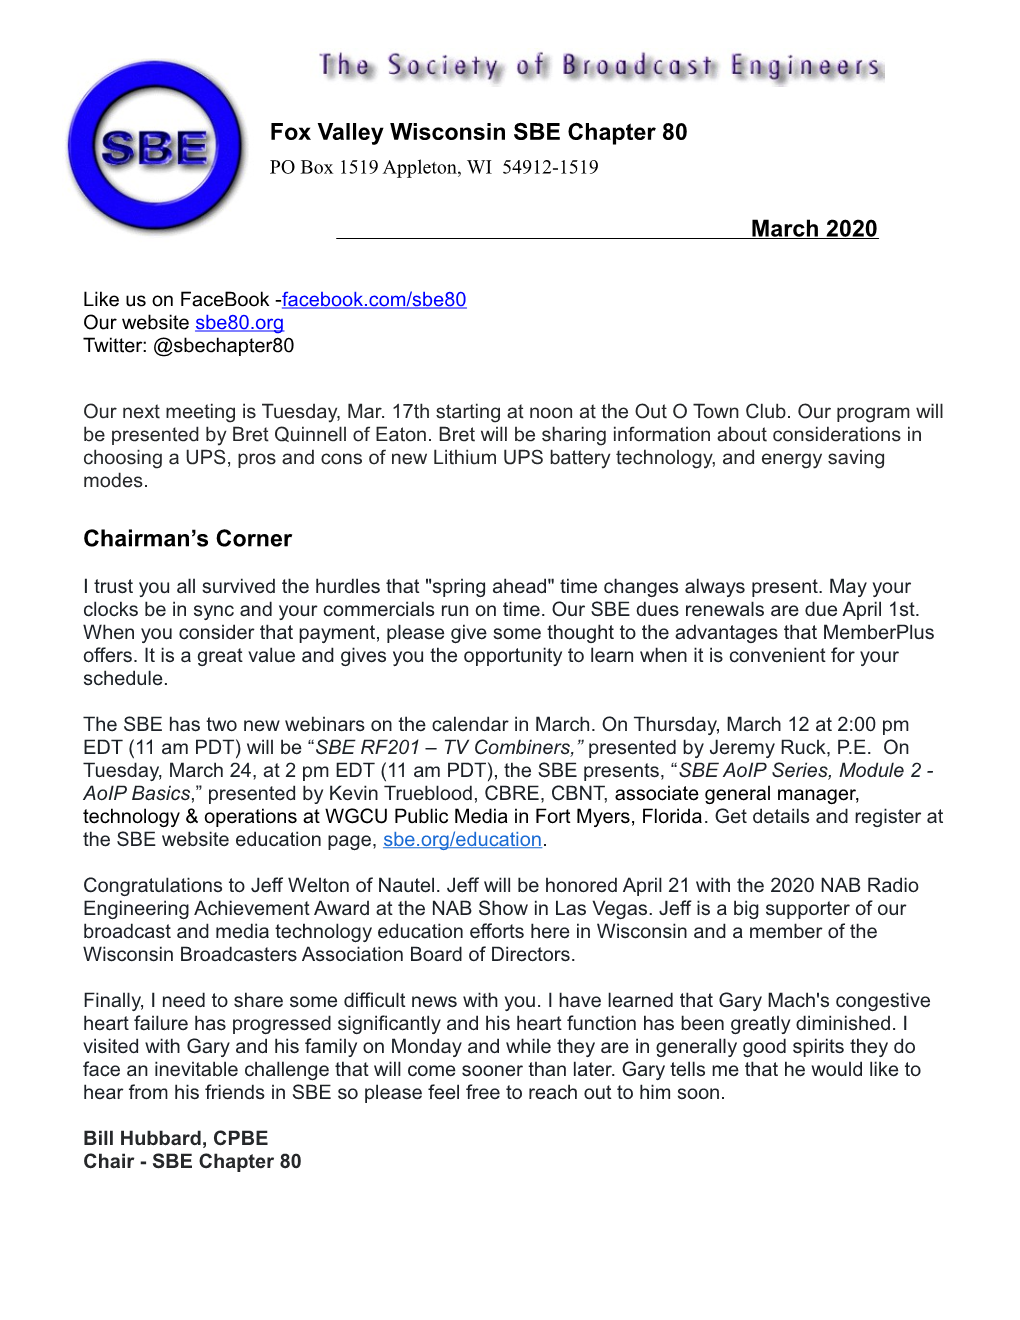 Fox Valley Wisconsin SBE Chapter 80 March 2020 Chairman's Corner